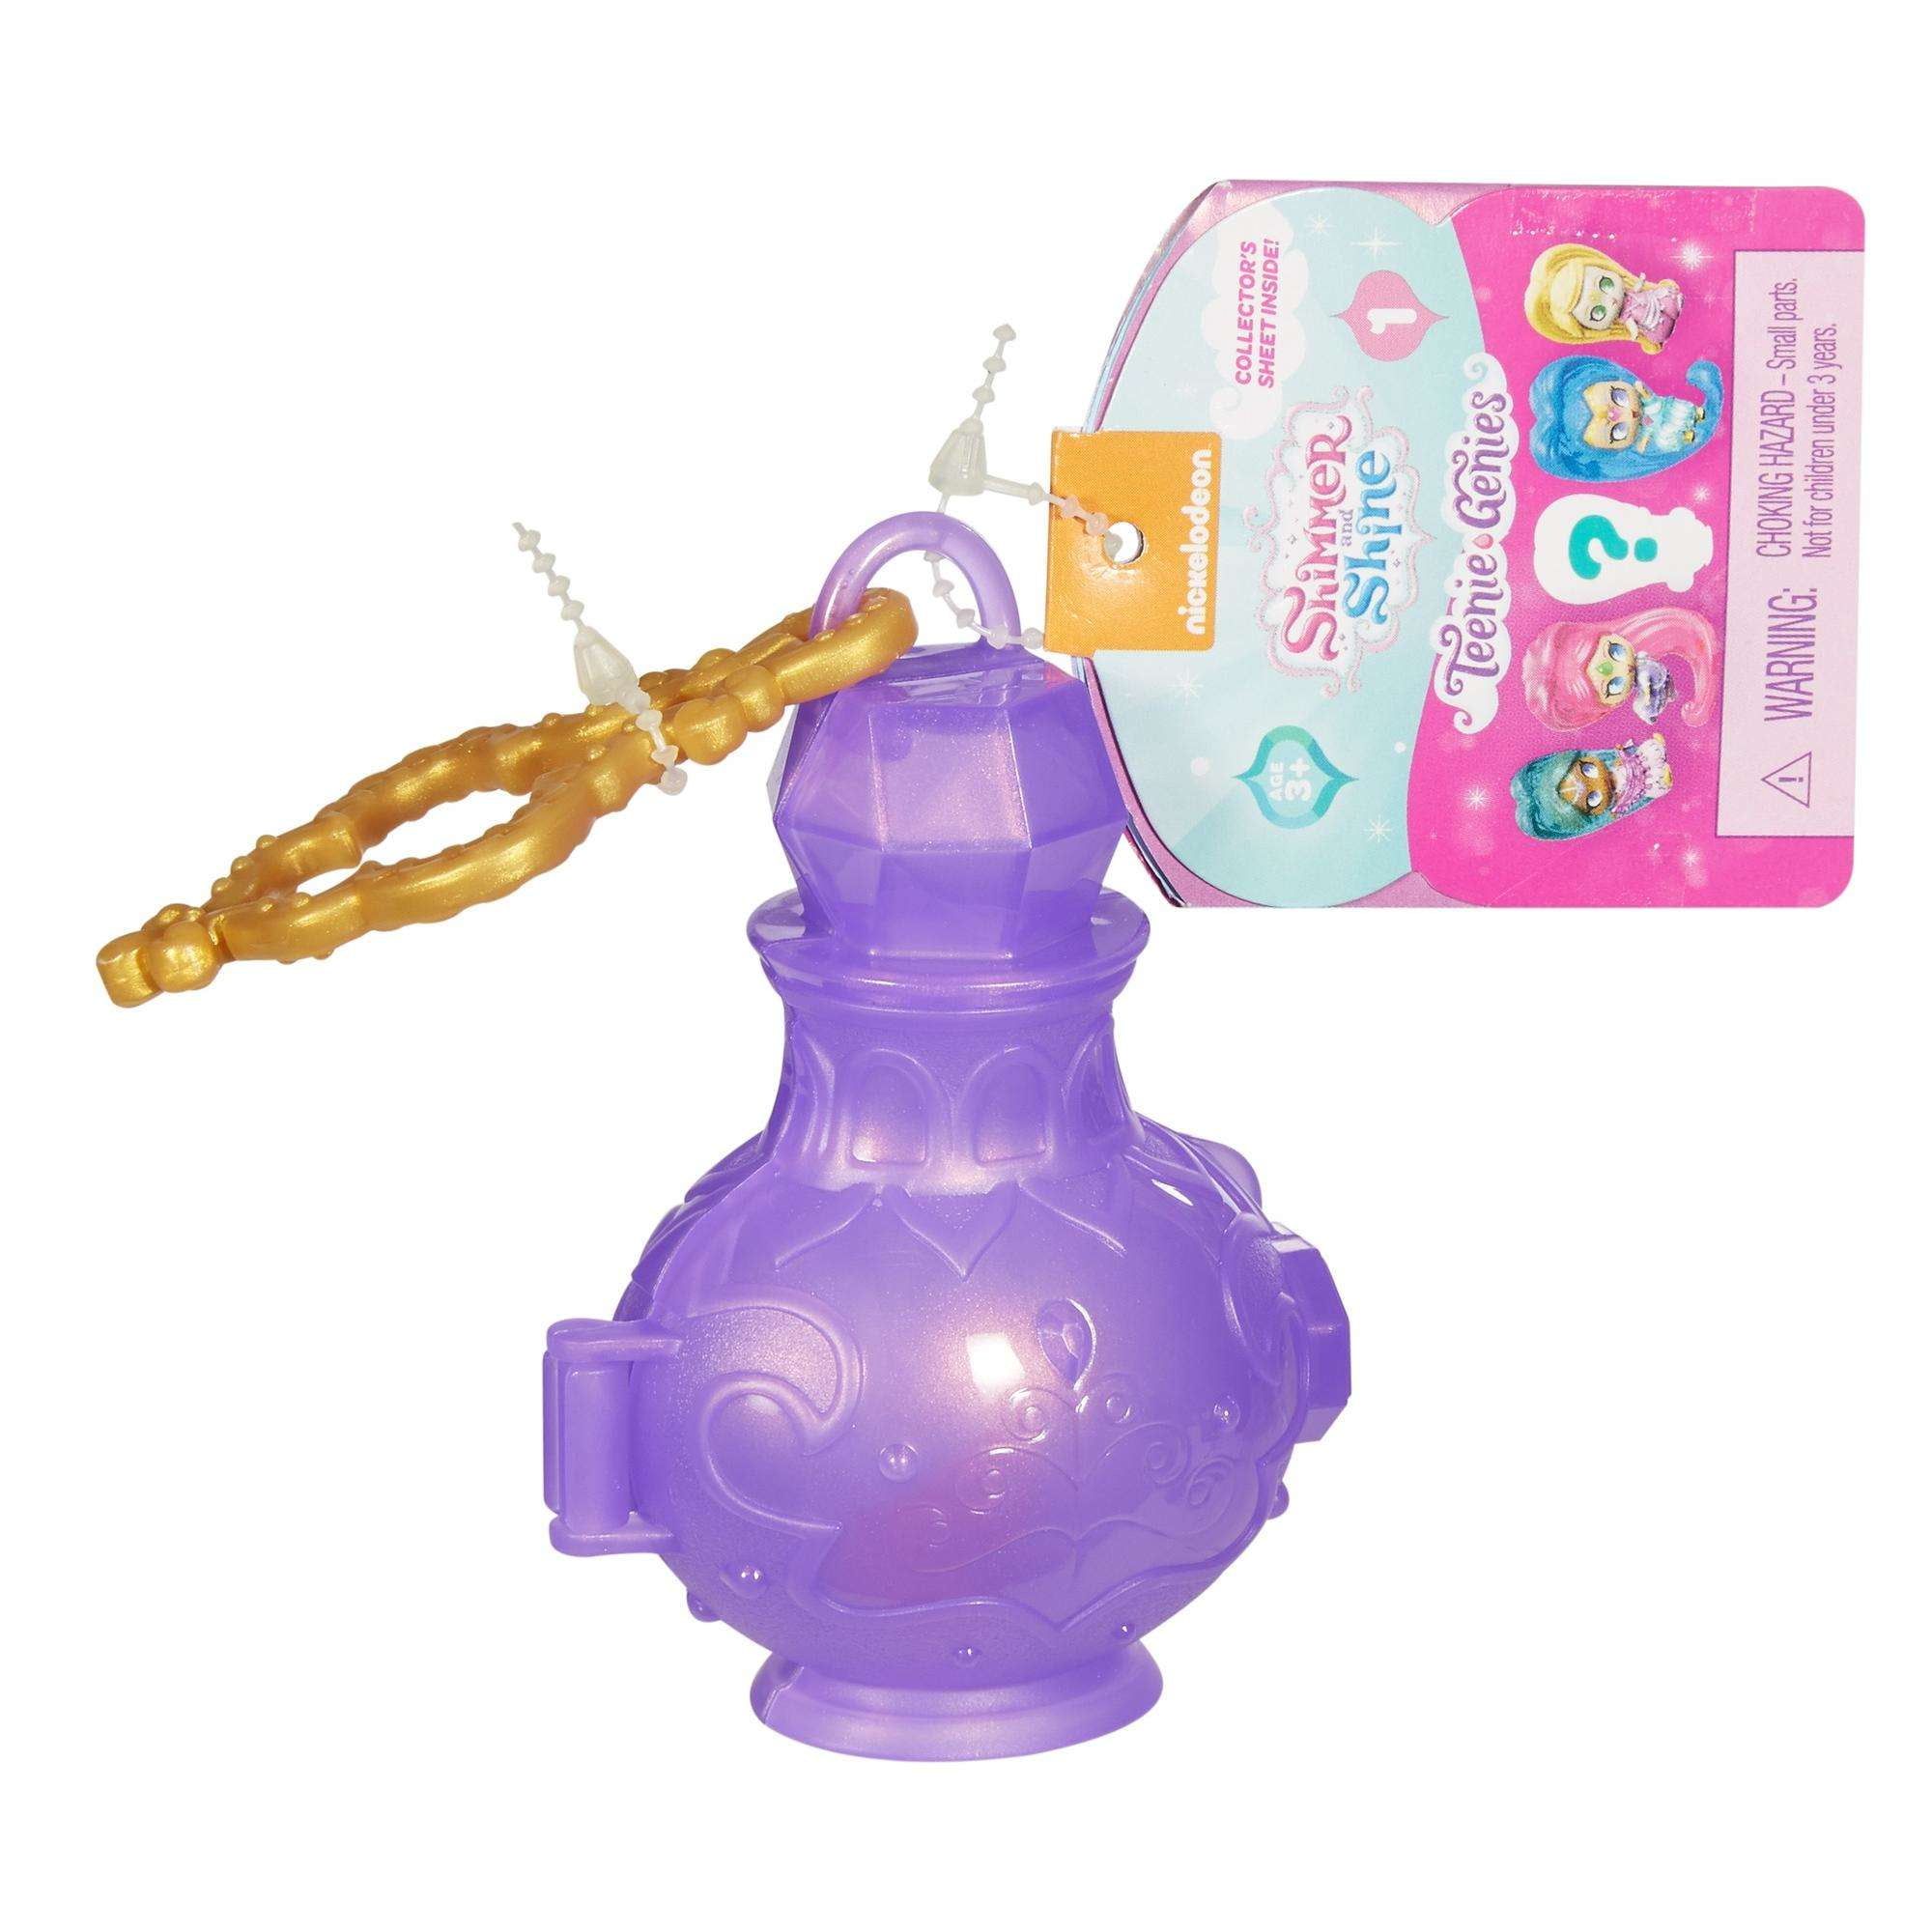 SHIMMER AND SHINE TEENIE GENIES SERIES 3 SURPRISE BOTTLE FIGURE BLIND TOYS DOLL